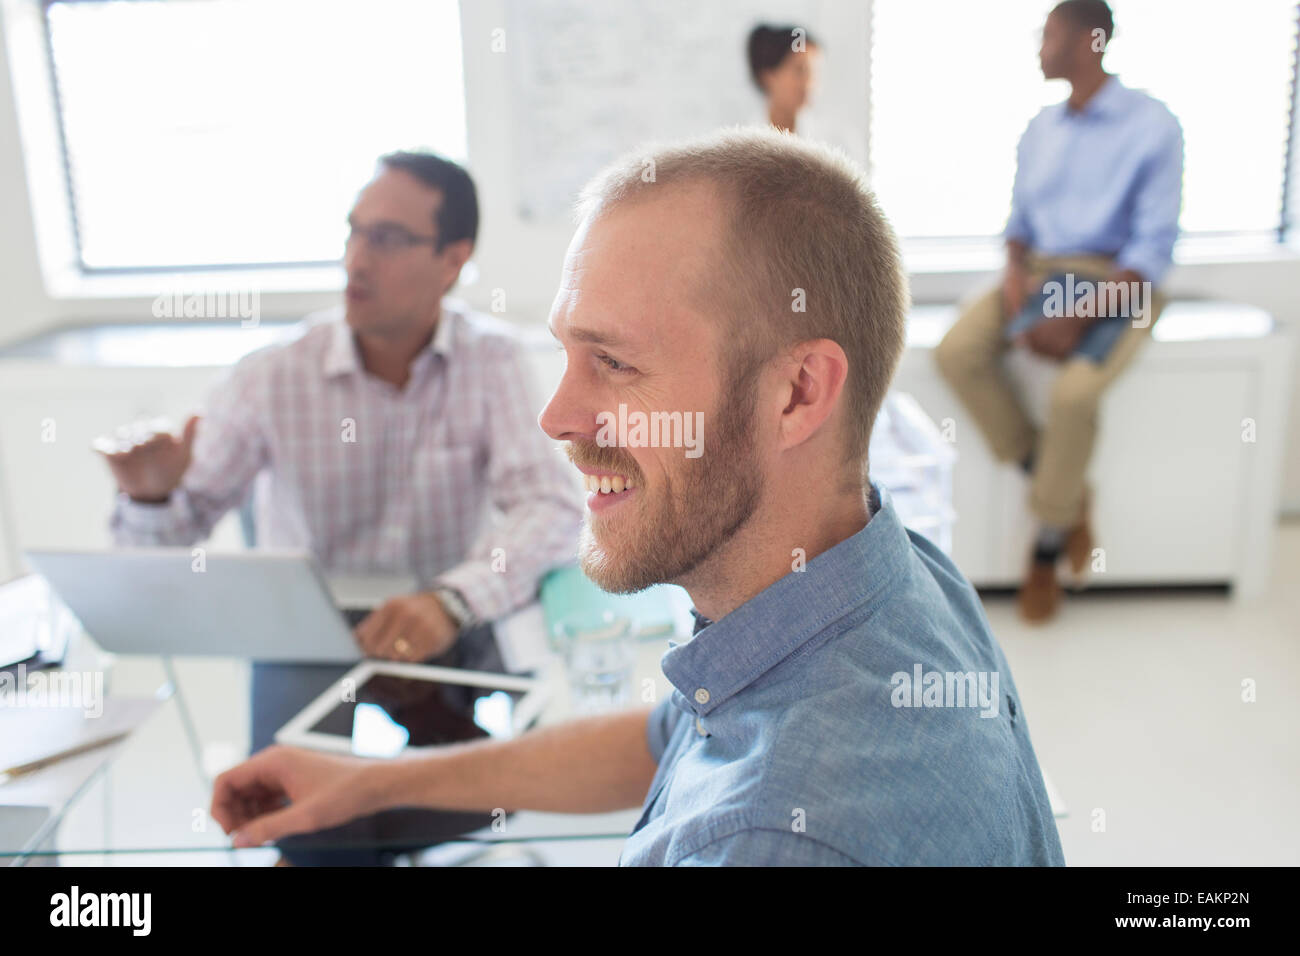 Smiling people during meeting in office Stock Photo